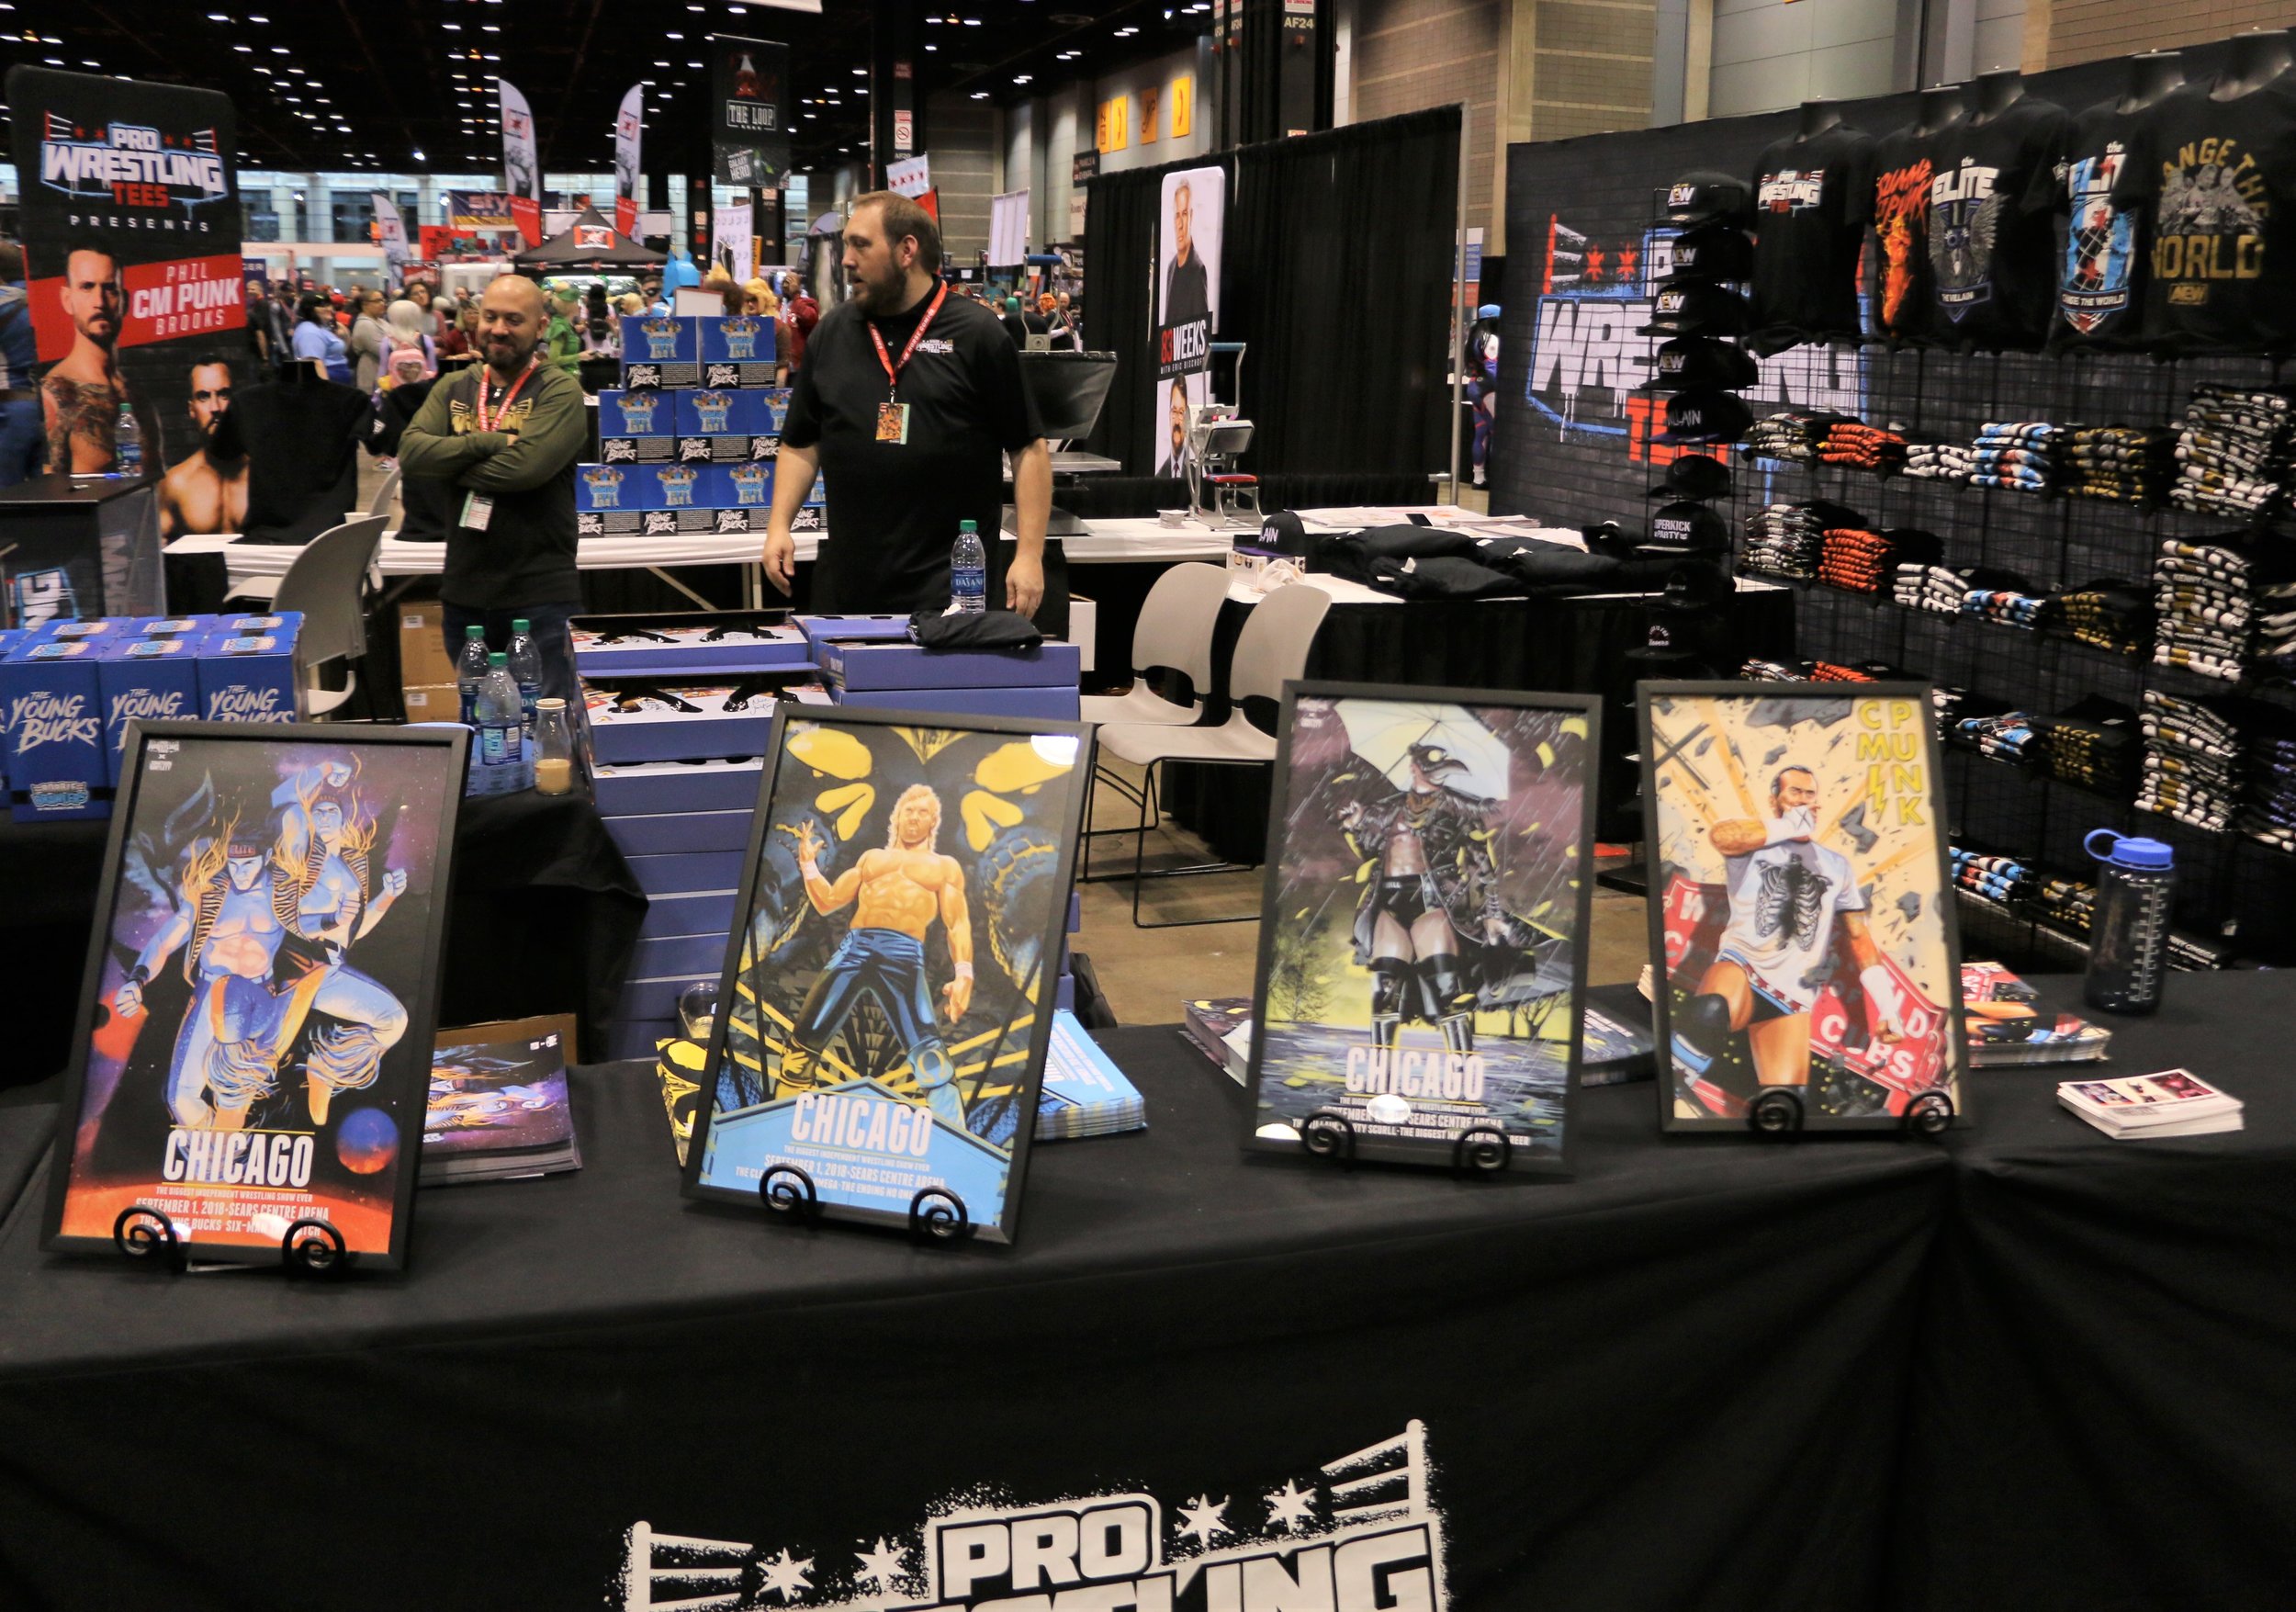  Cool portraits and merchandise at the Pro Wrestling Tees booth. 